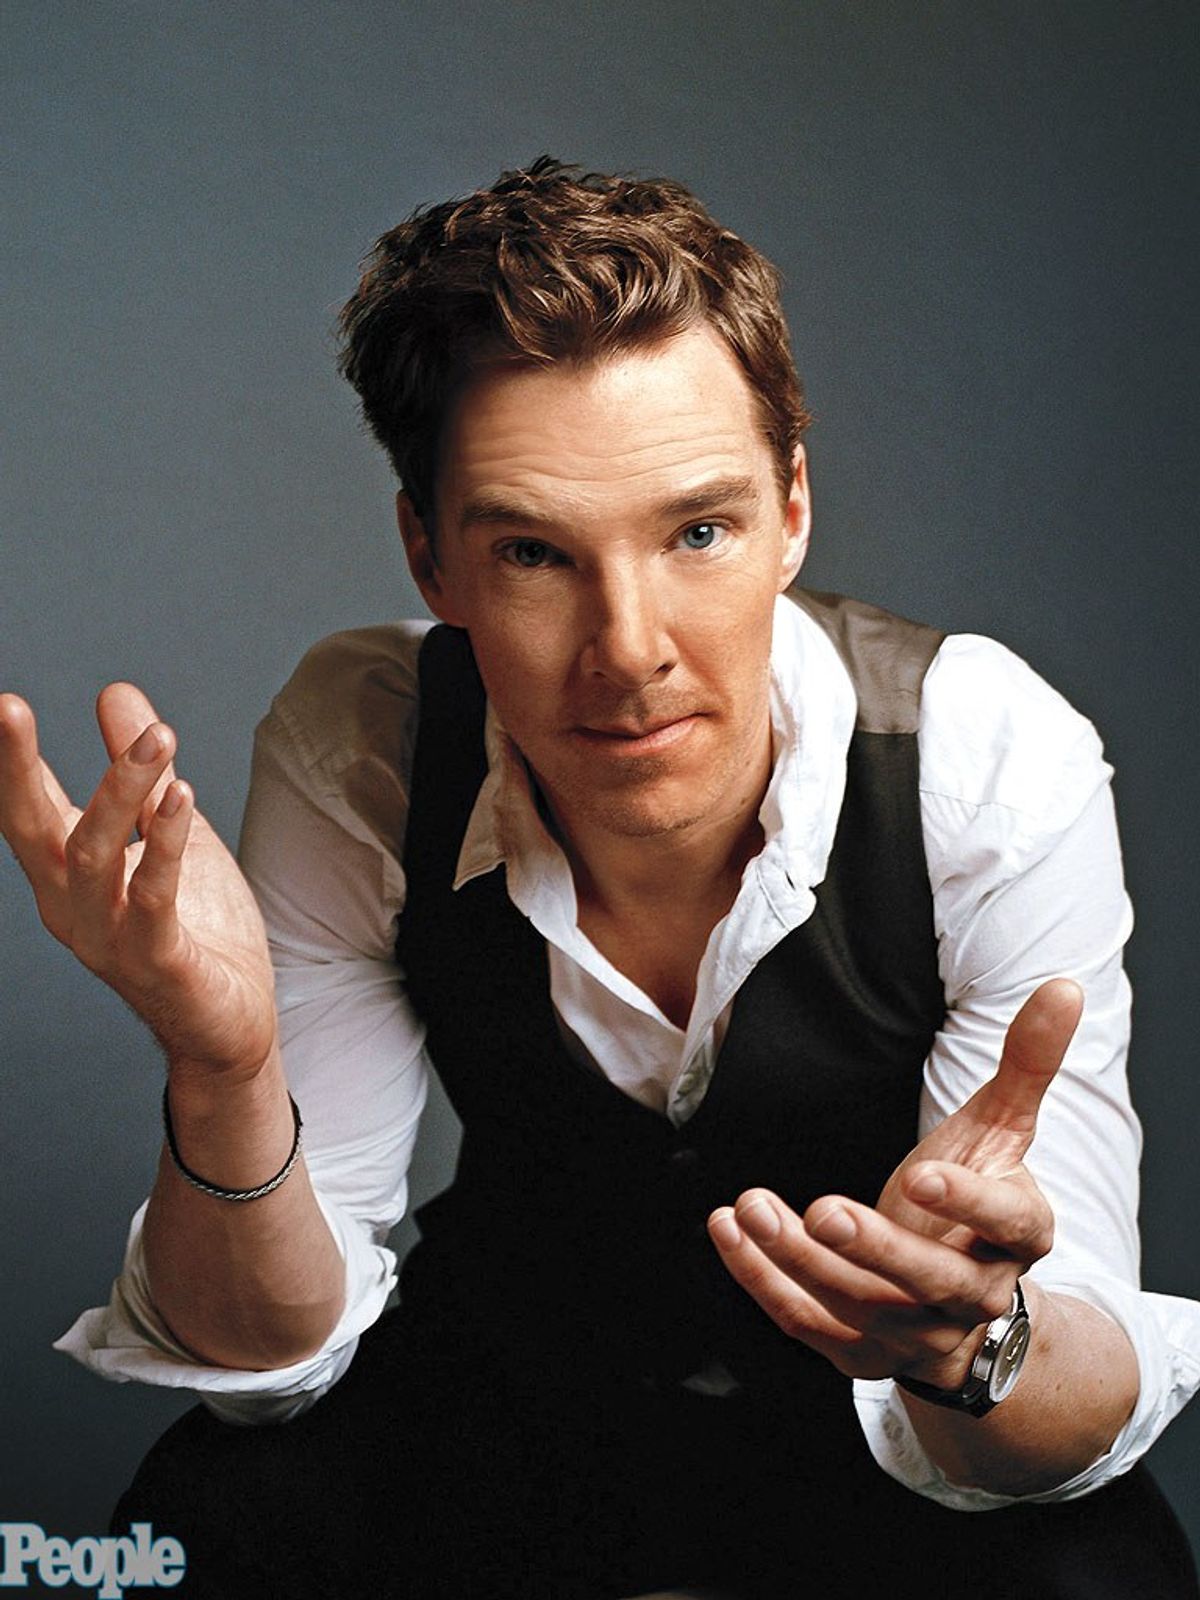 10 Things to Watch if You're Into Benedict Cumberbatch